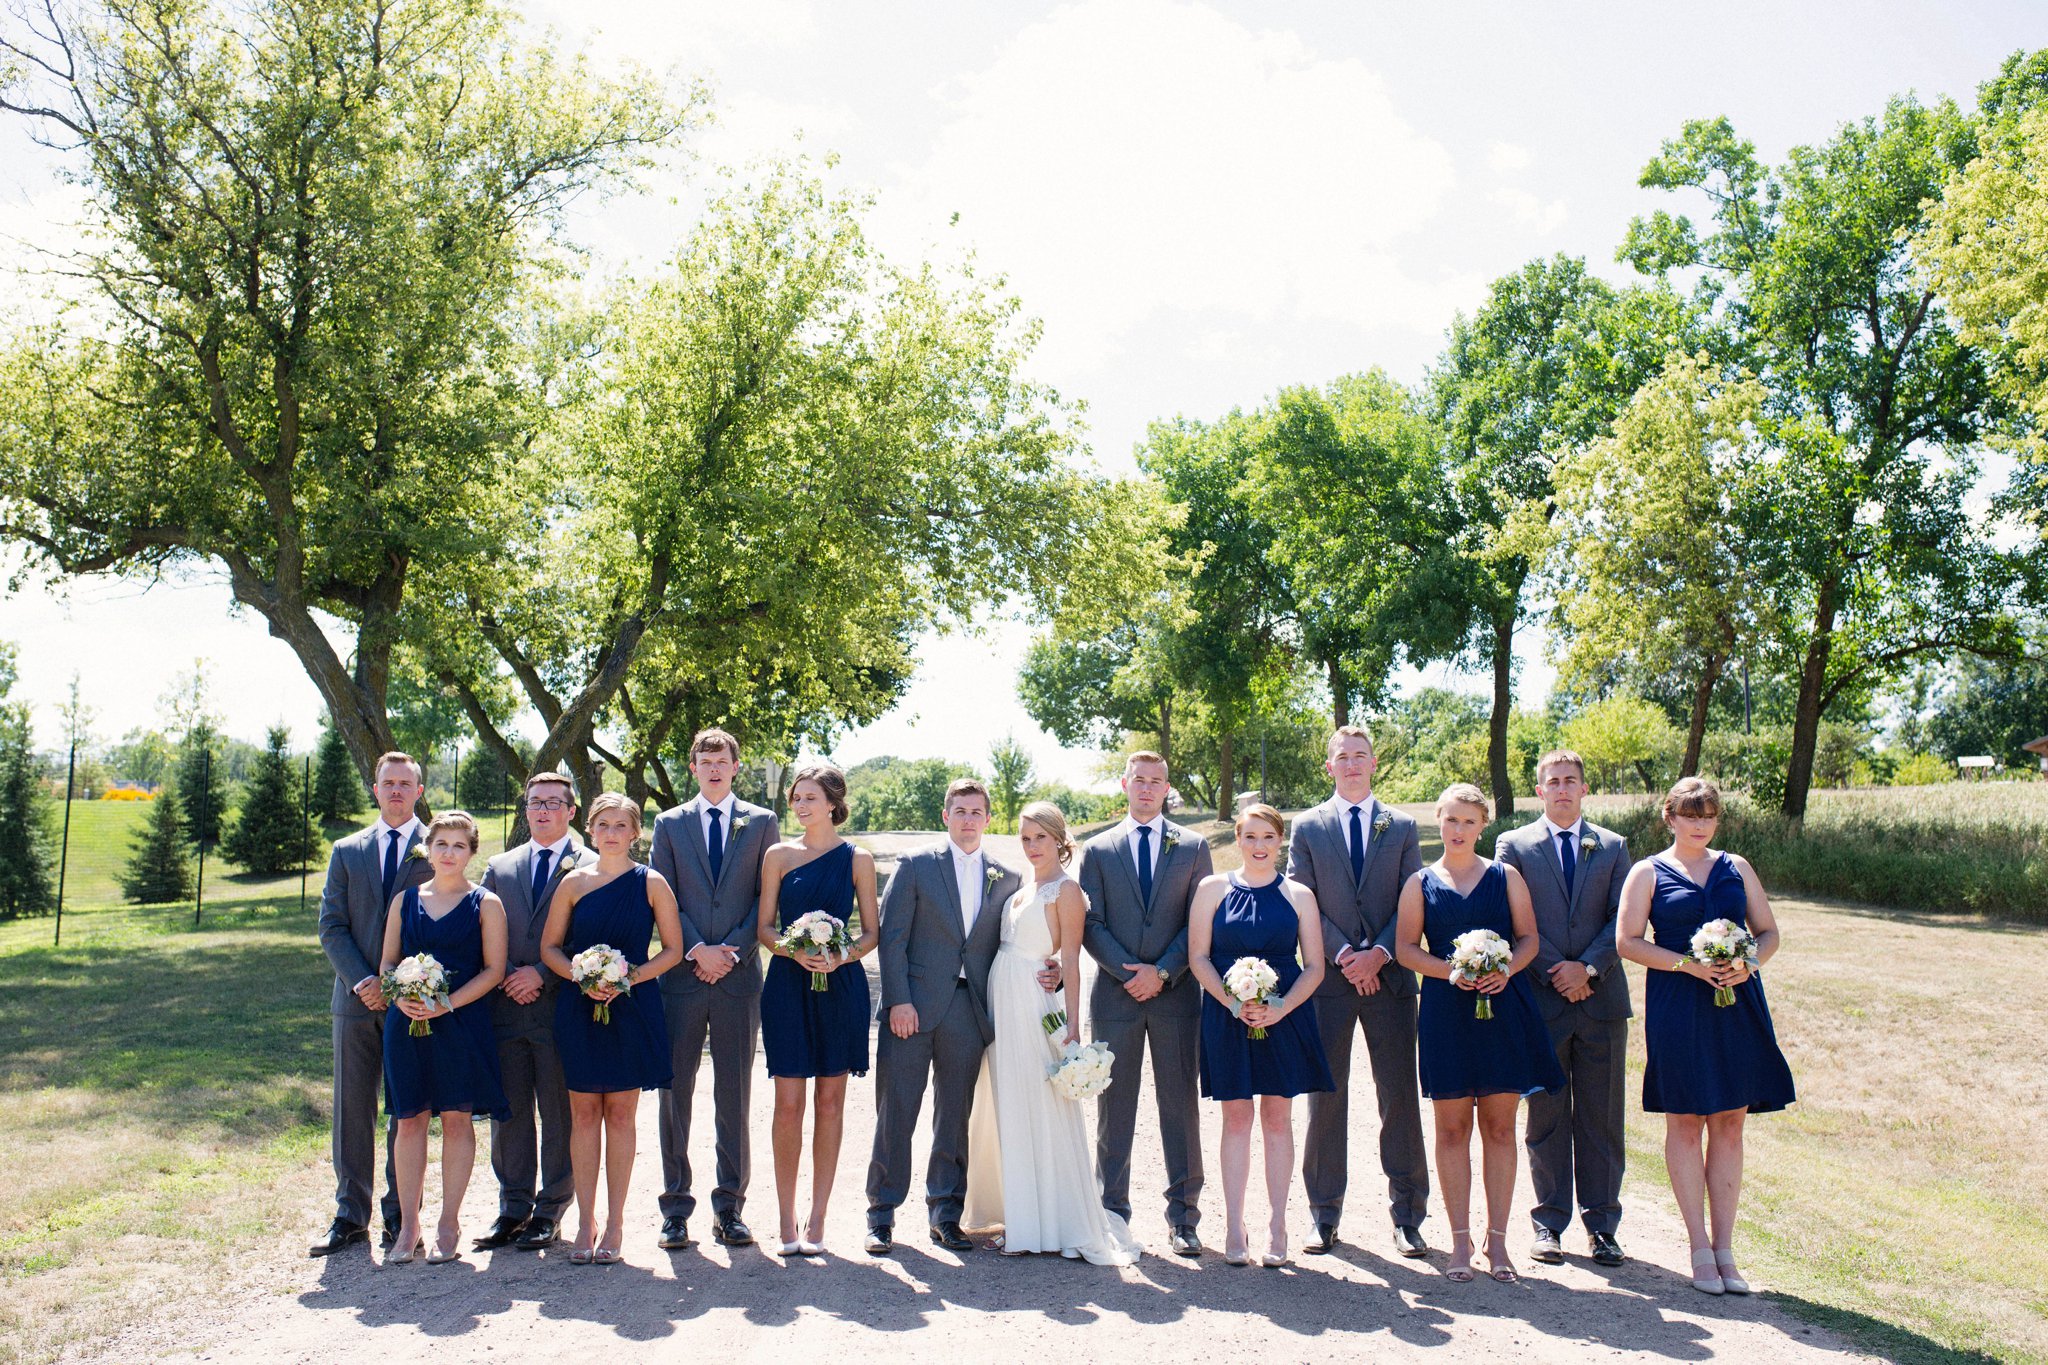 Sioux Falls Wedding Photos | Destination Photographer | Felicia The Photographer | Mary Jo Wegner Arboretum | Bridal Party | Navy one shoulder dresses | serious | indie | Hipster